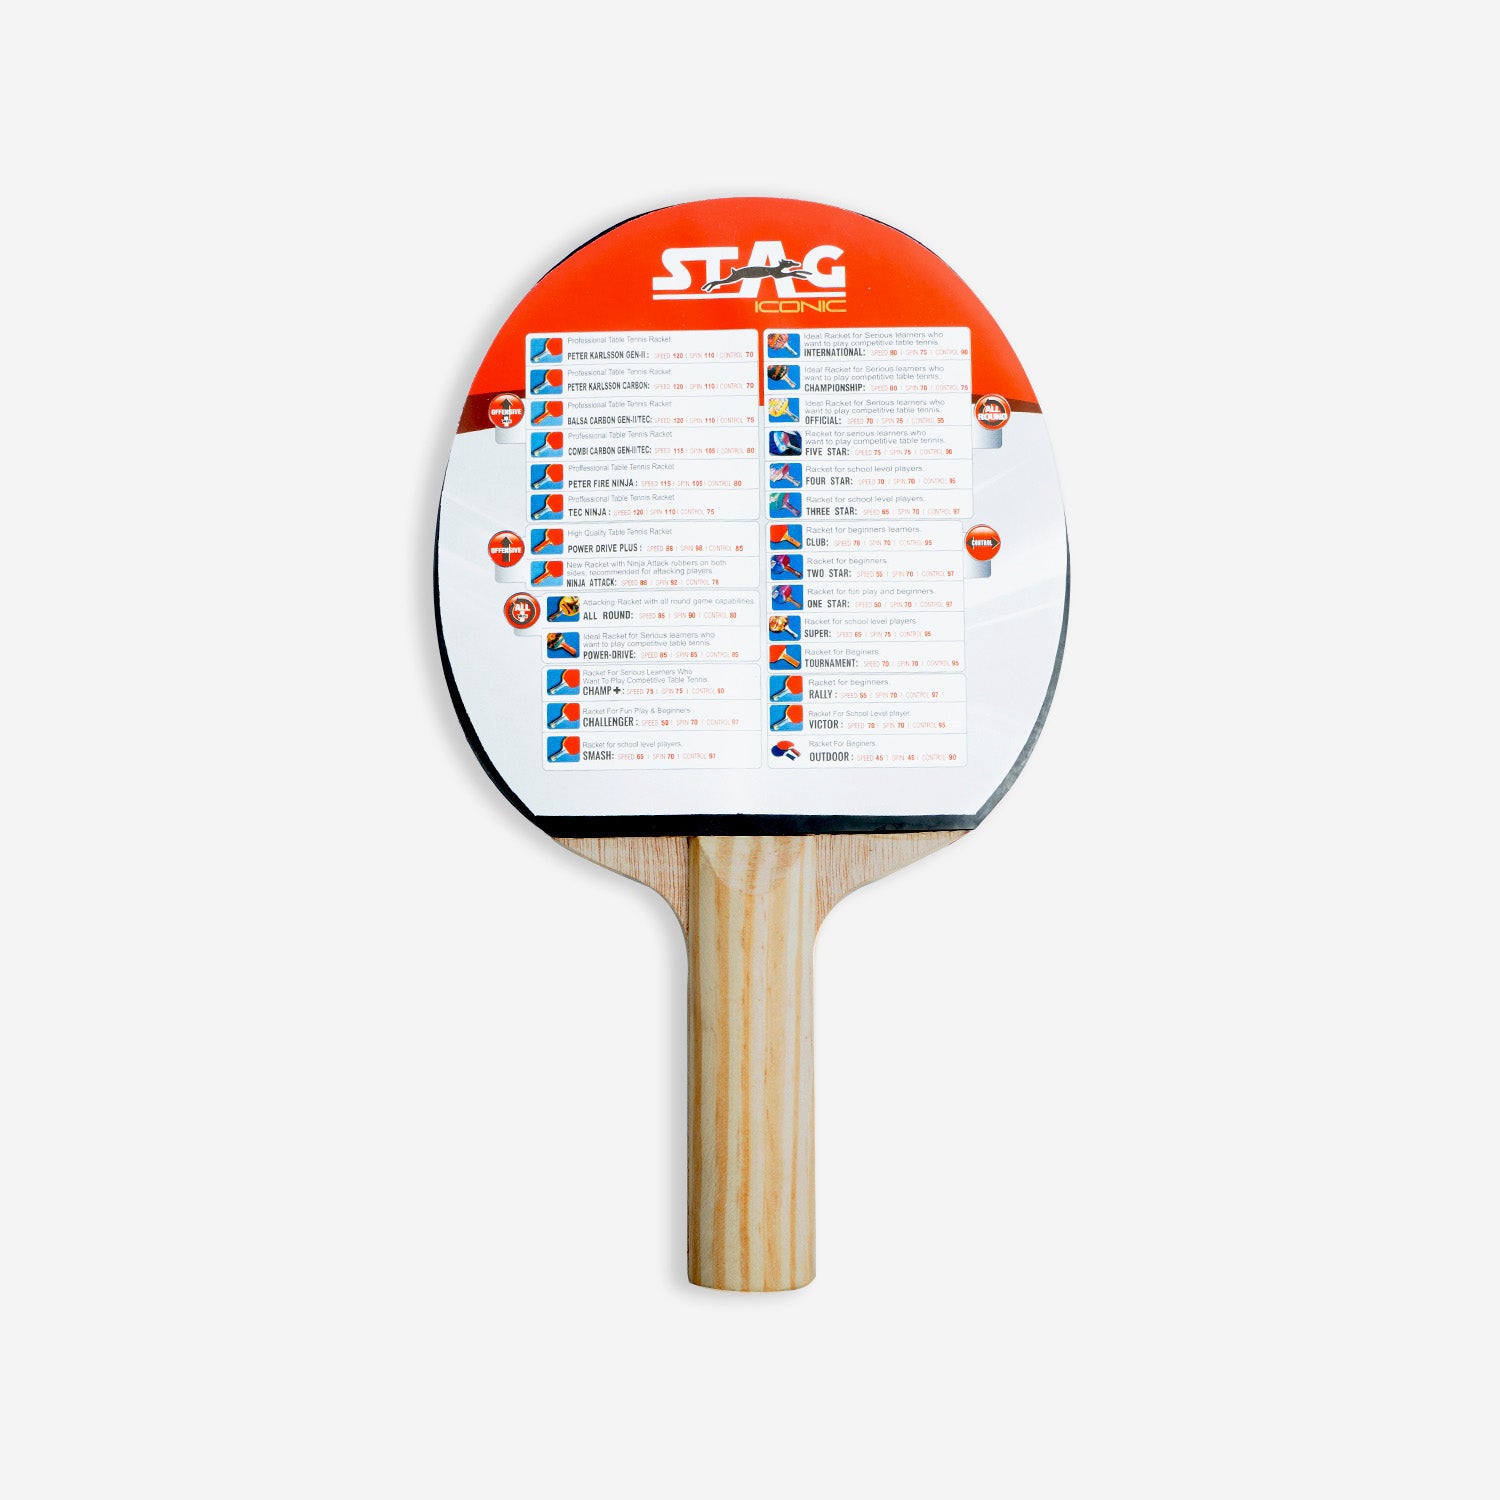 Stag 2 Star Table Tennis Racquet